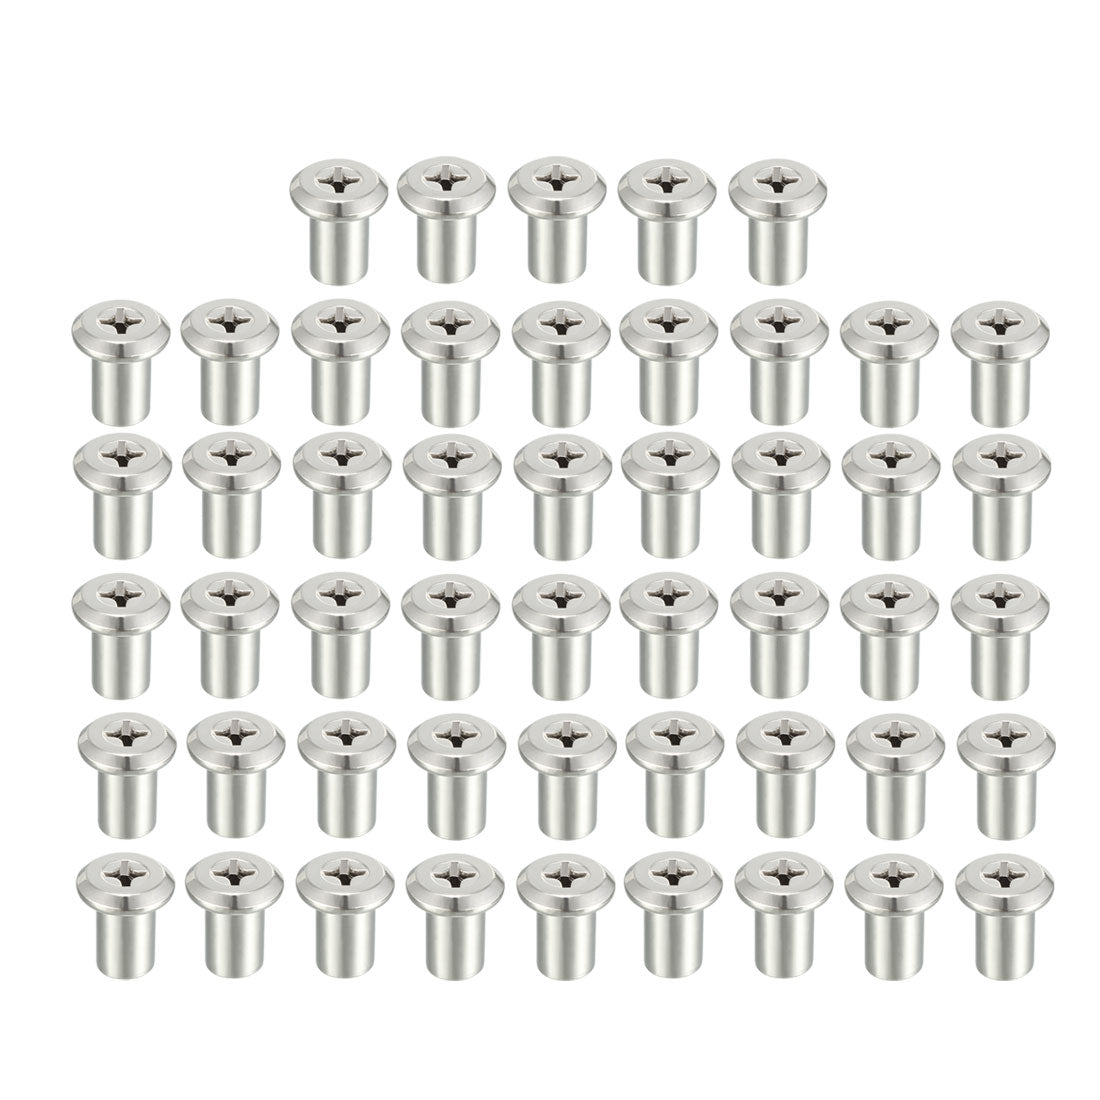 uxcell Uxcell M6x12mm Phillips Head Insert Nut Screw Post Sleeve Nut for Furniture 50pcs